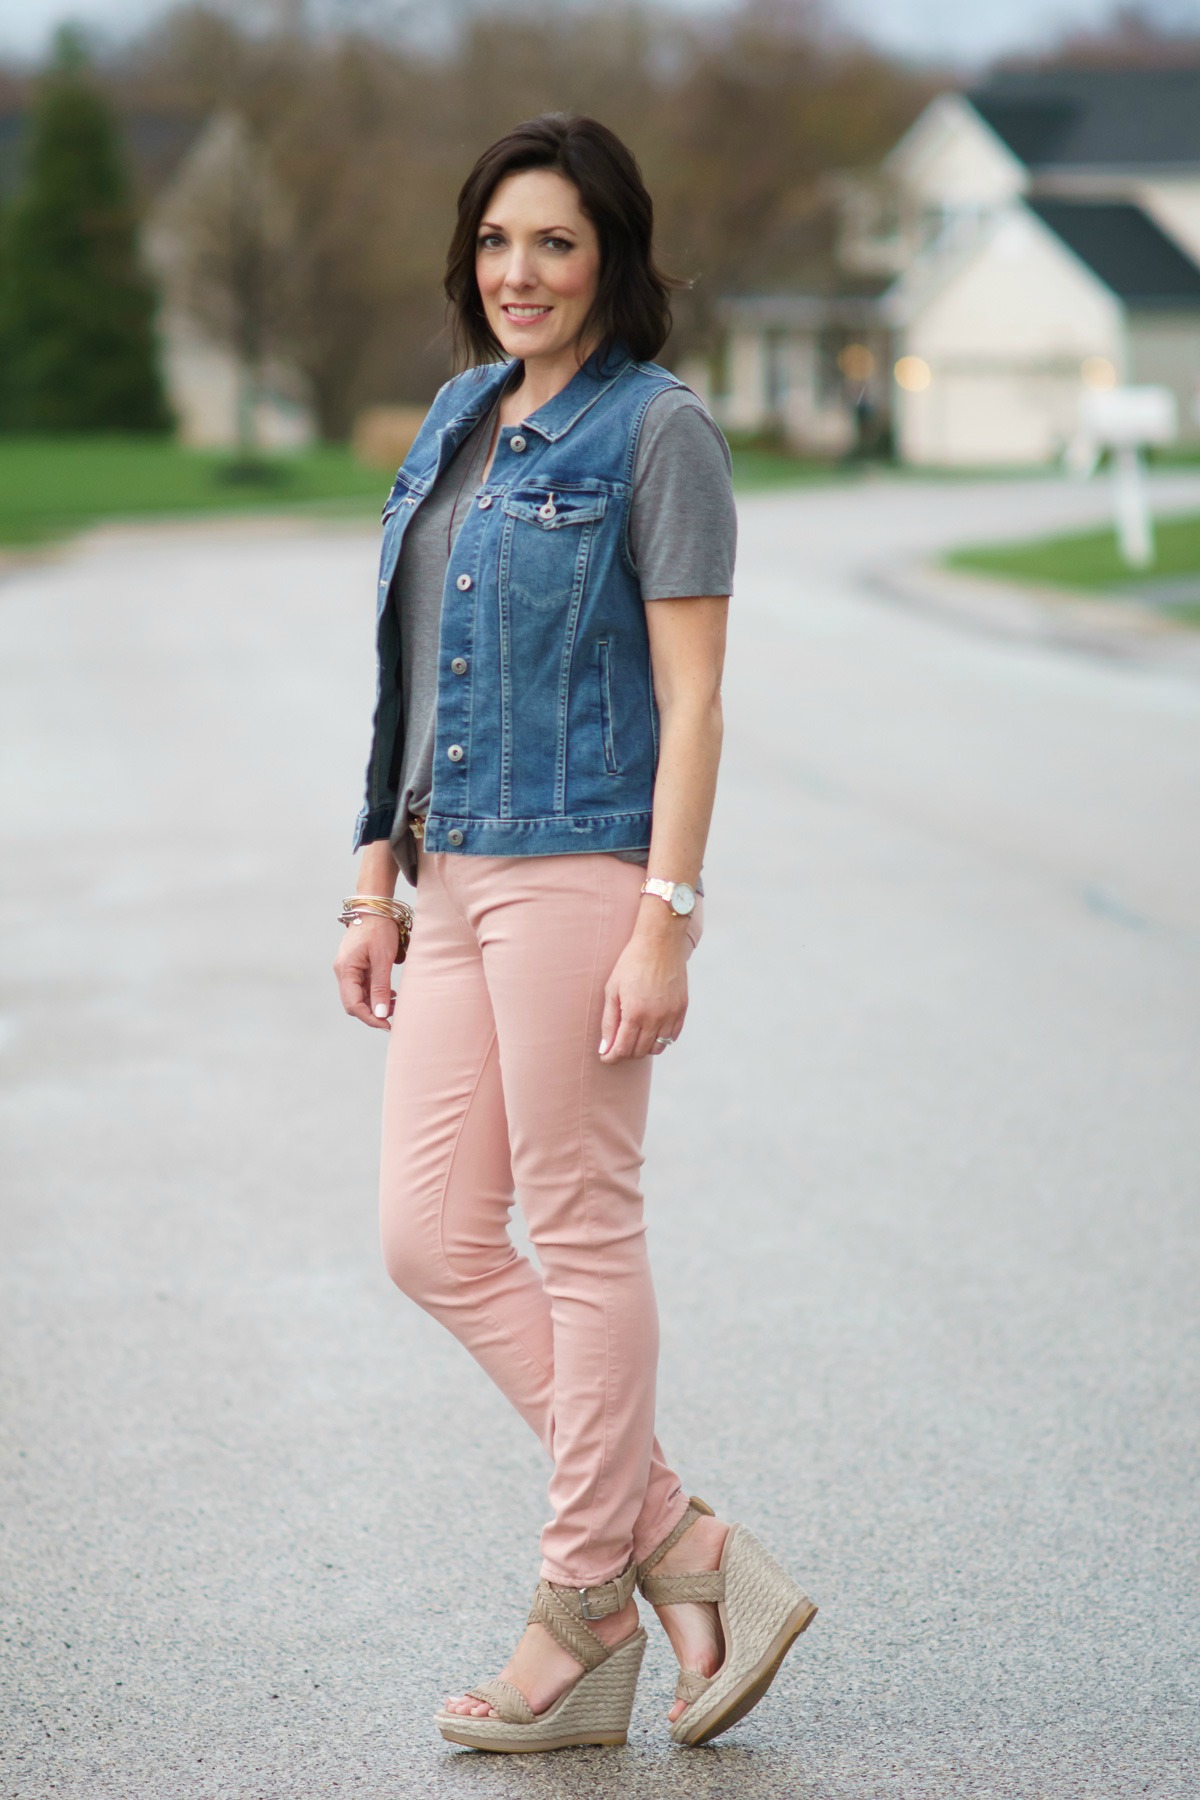 How To Style Pink Jeans: pink jeans, grey tee, denim vest, and wedge sandals